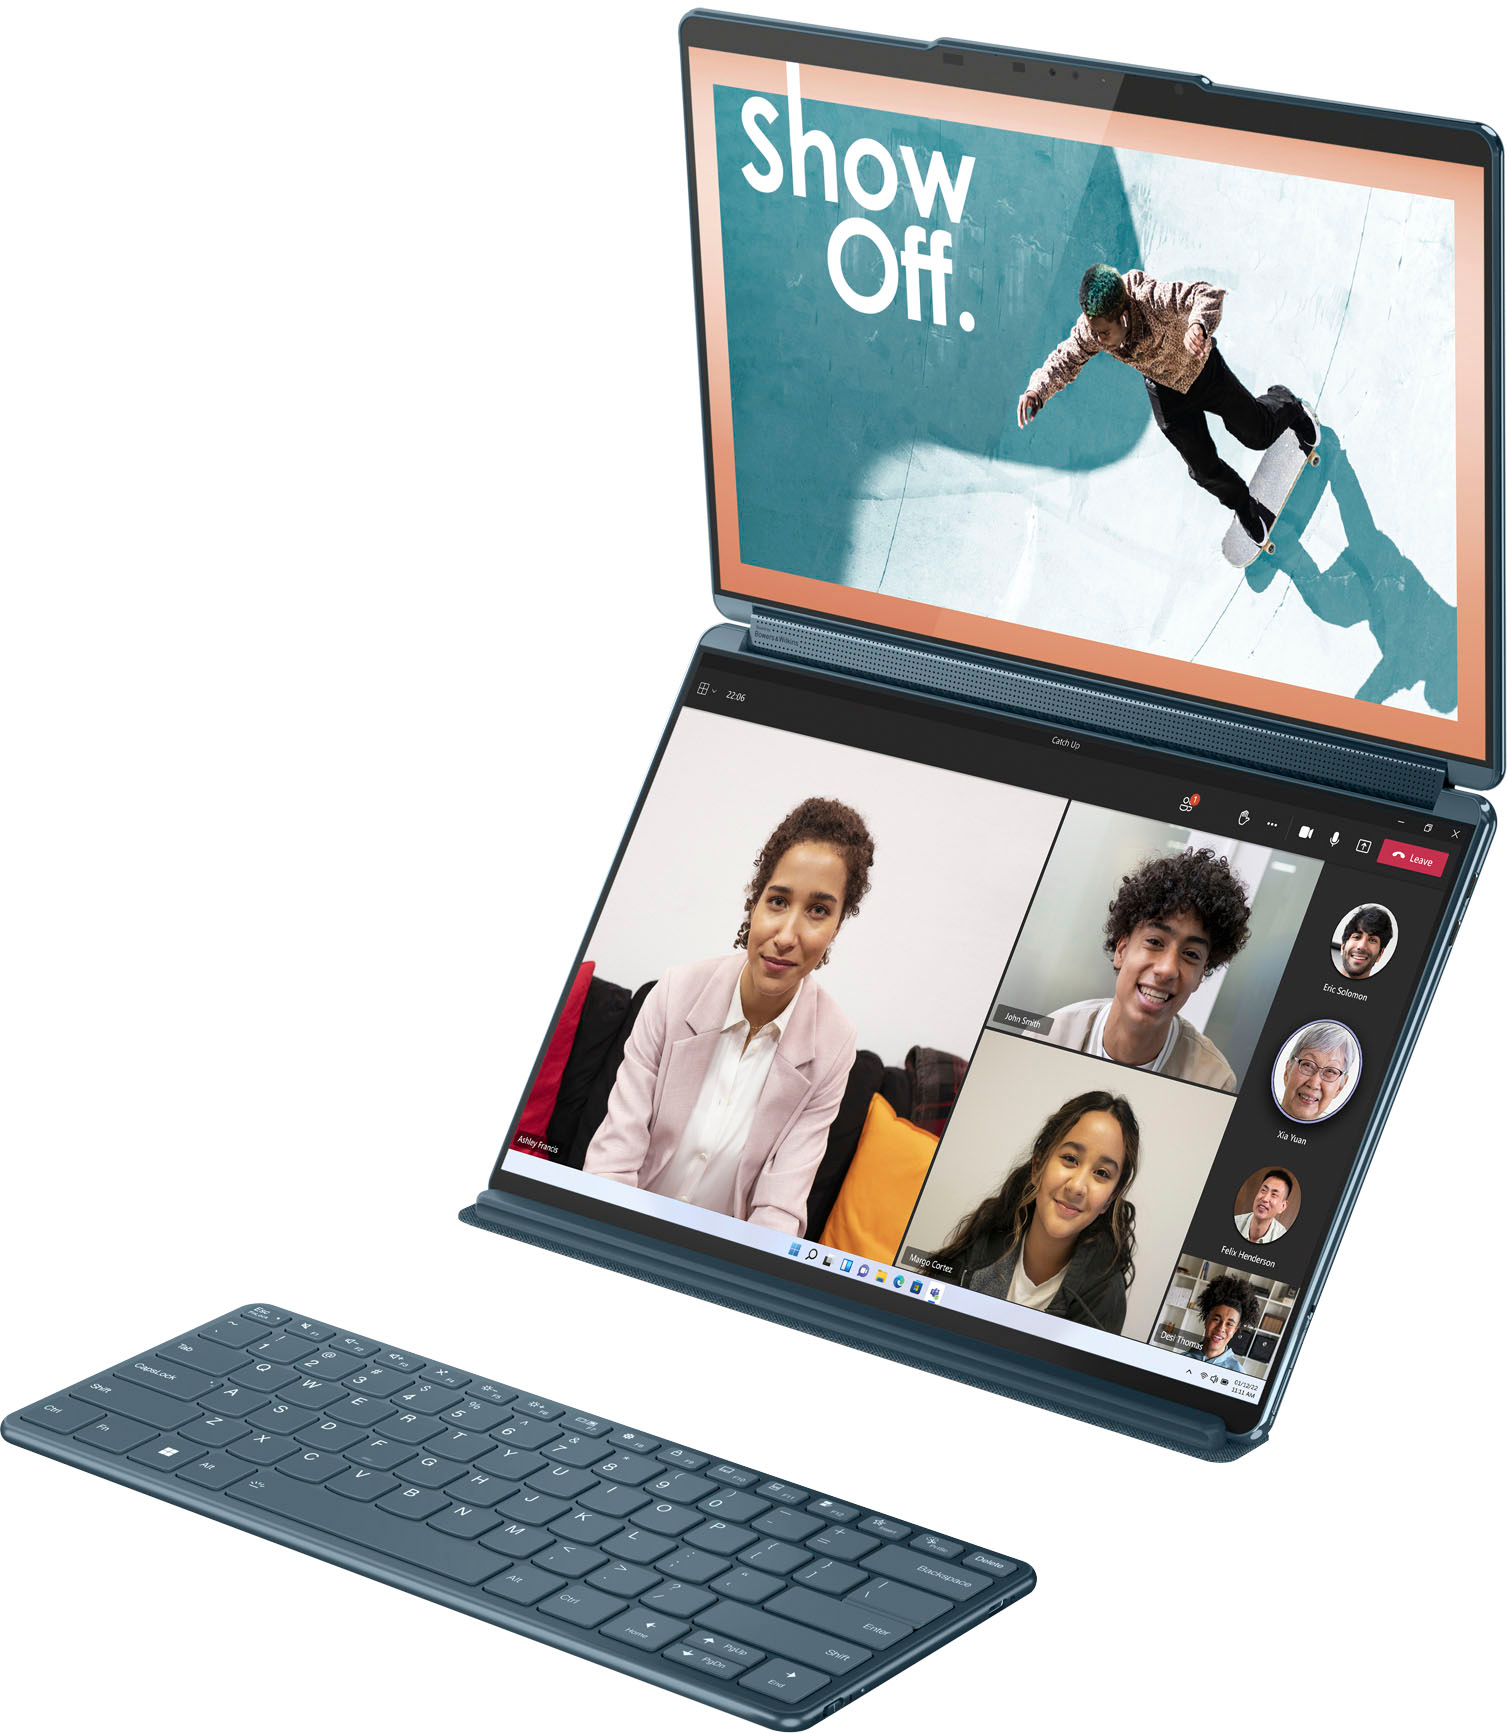 Lenovo's Yoga Book 9i is their first full size dual screen laptop